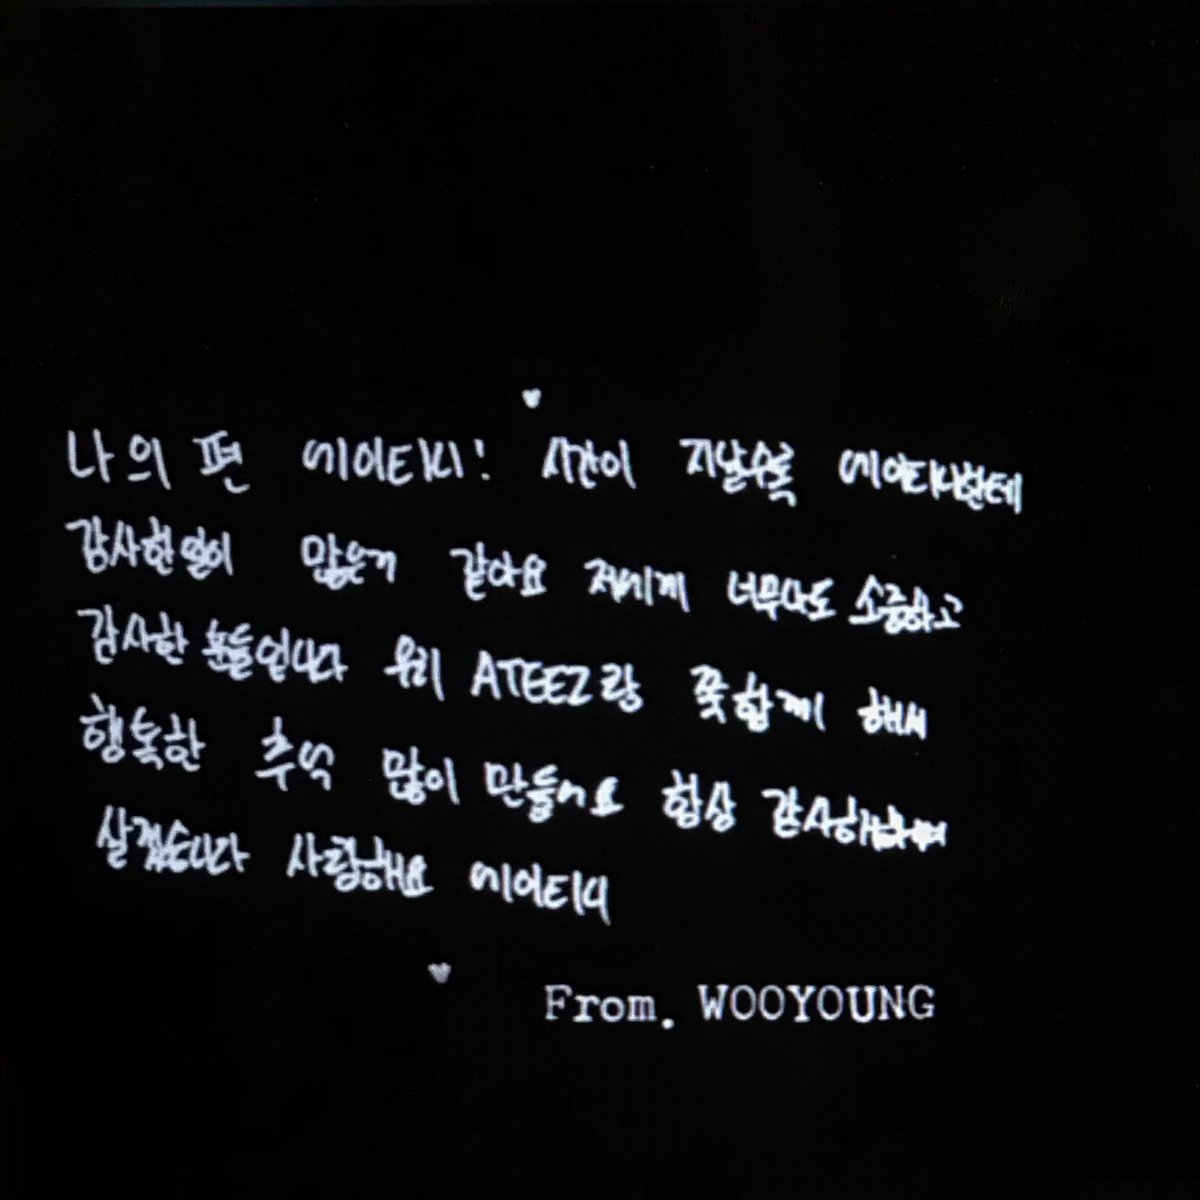 WOOYOUNG:ATINY on my side! The more time that goes by I feel there's more to be thankful to ATINY forTo me, you are such precious people that I am thankful forLet's stick with ATEEZ together and make lots of happy memoriesI will always live feeling gratefulLove you ATINY